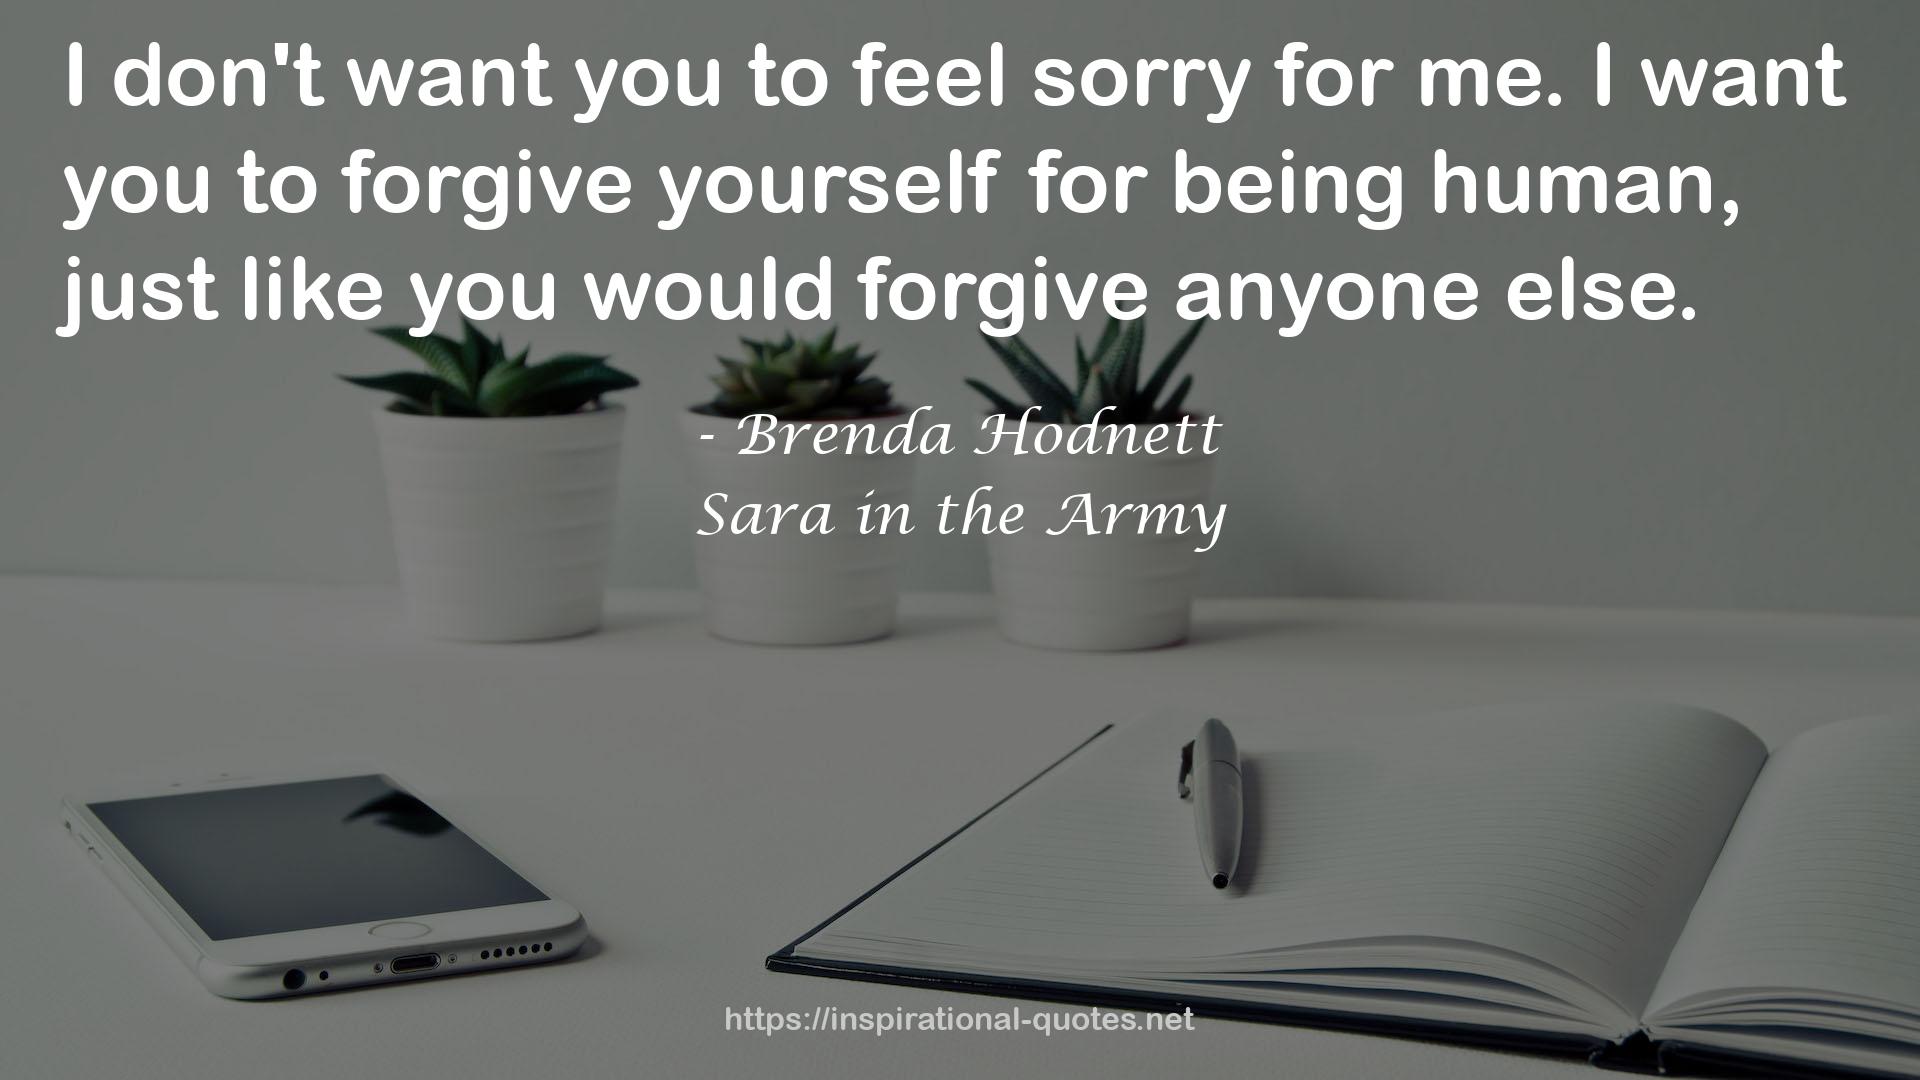 Sara in the Army QUOTES